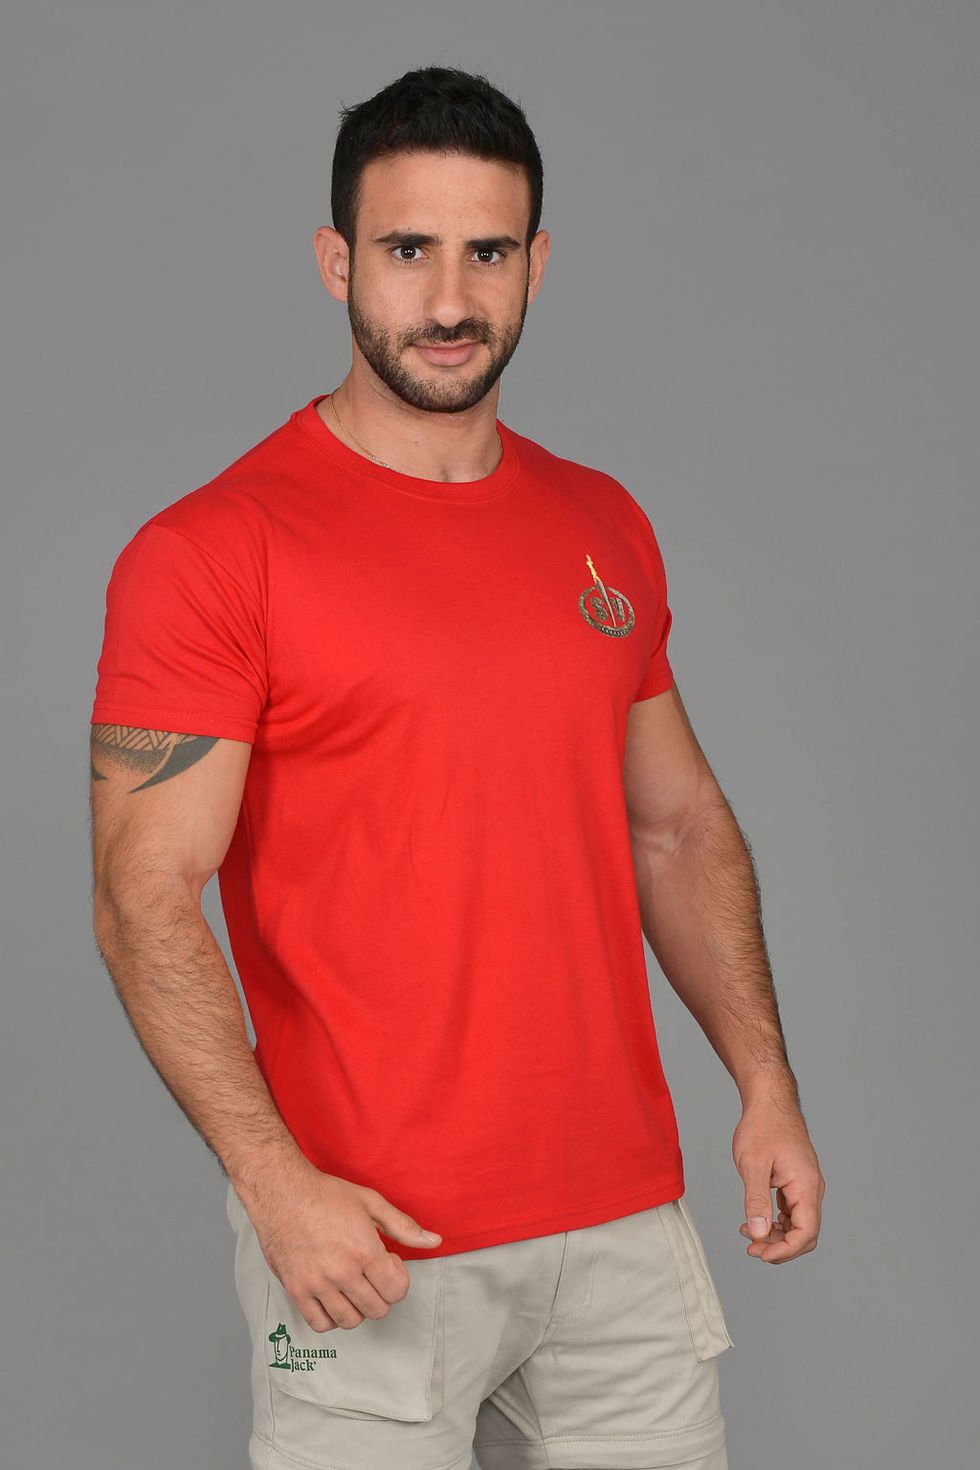 T-shirt, Clothing, Red, Neck, Sleeve, Shoulder, Orange, Top, Muscle, Active shirt, 